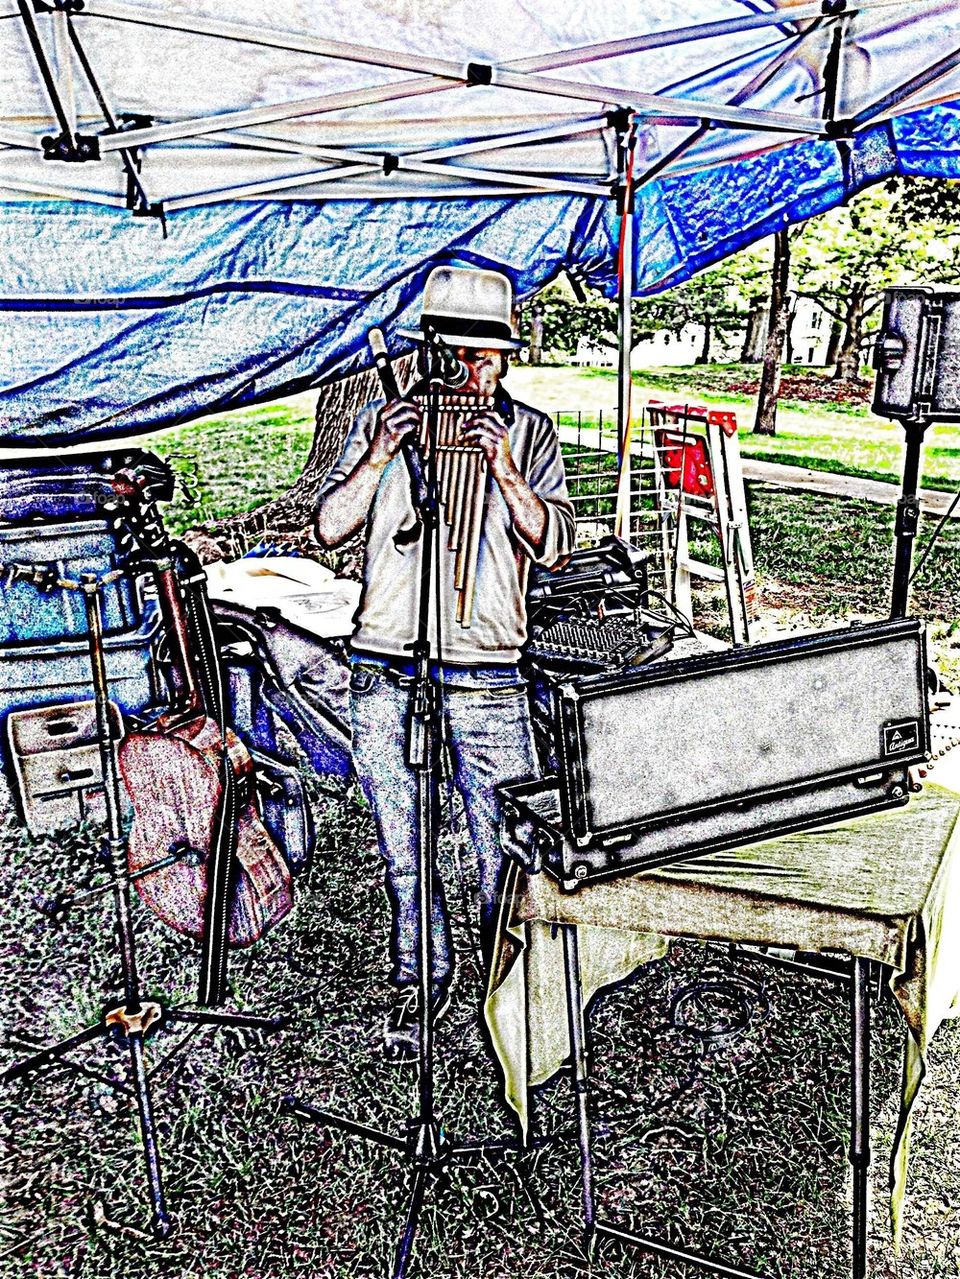 Man playing a cool instrument at our local fair in Westerly Rhode Island